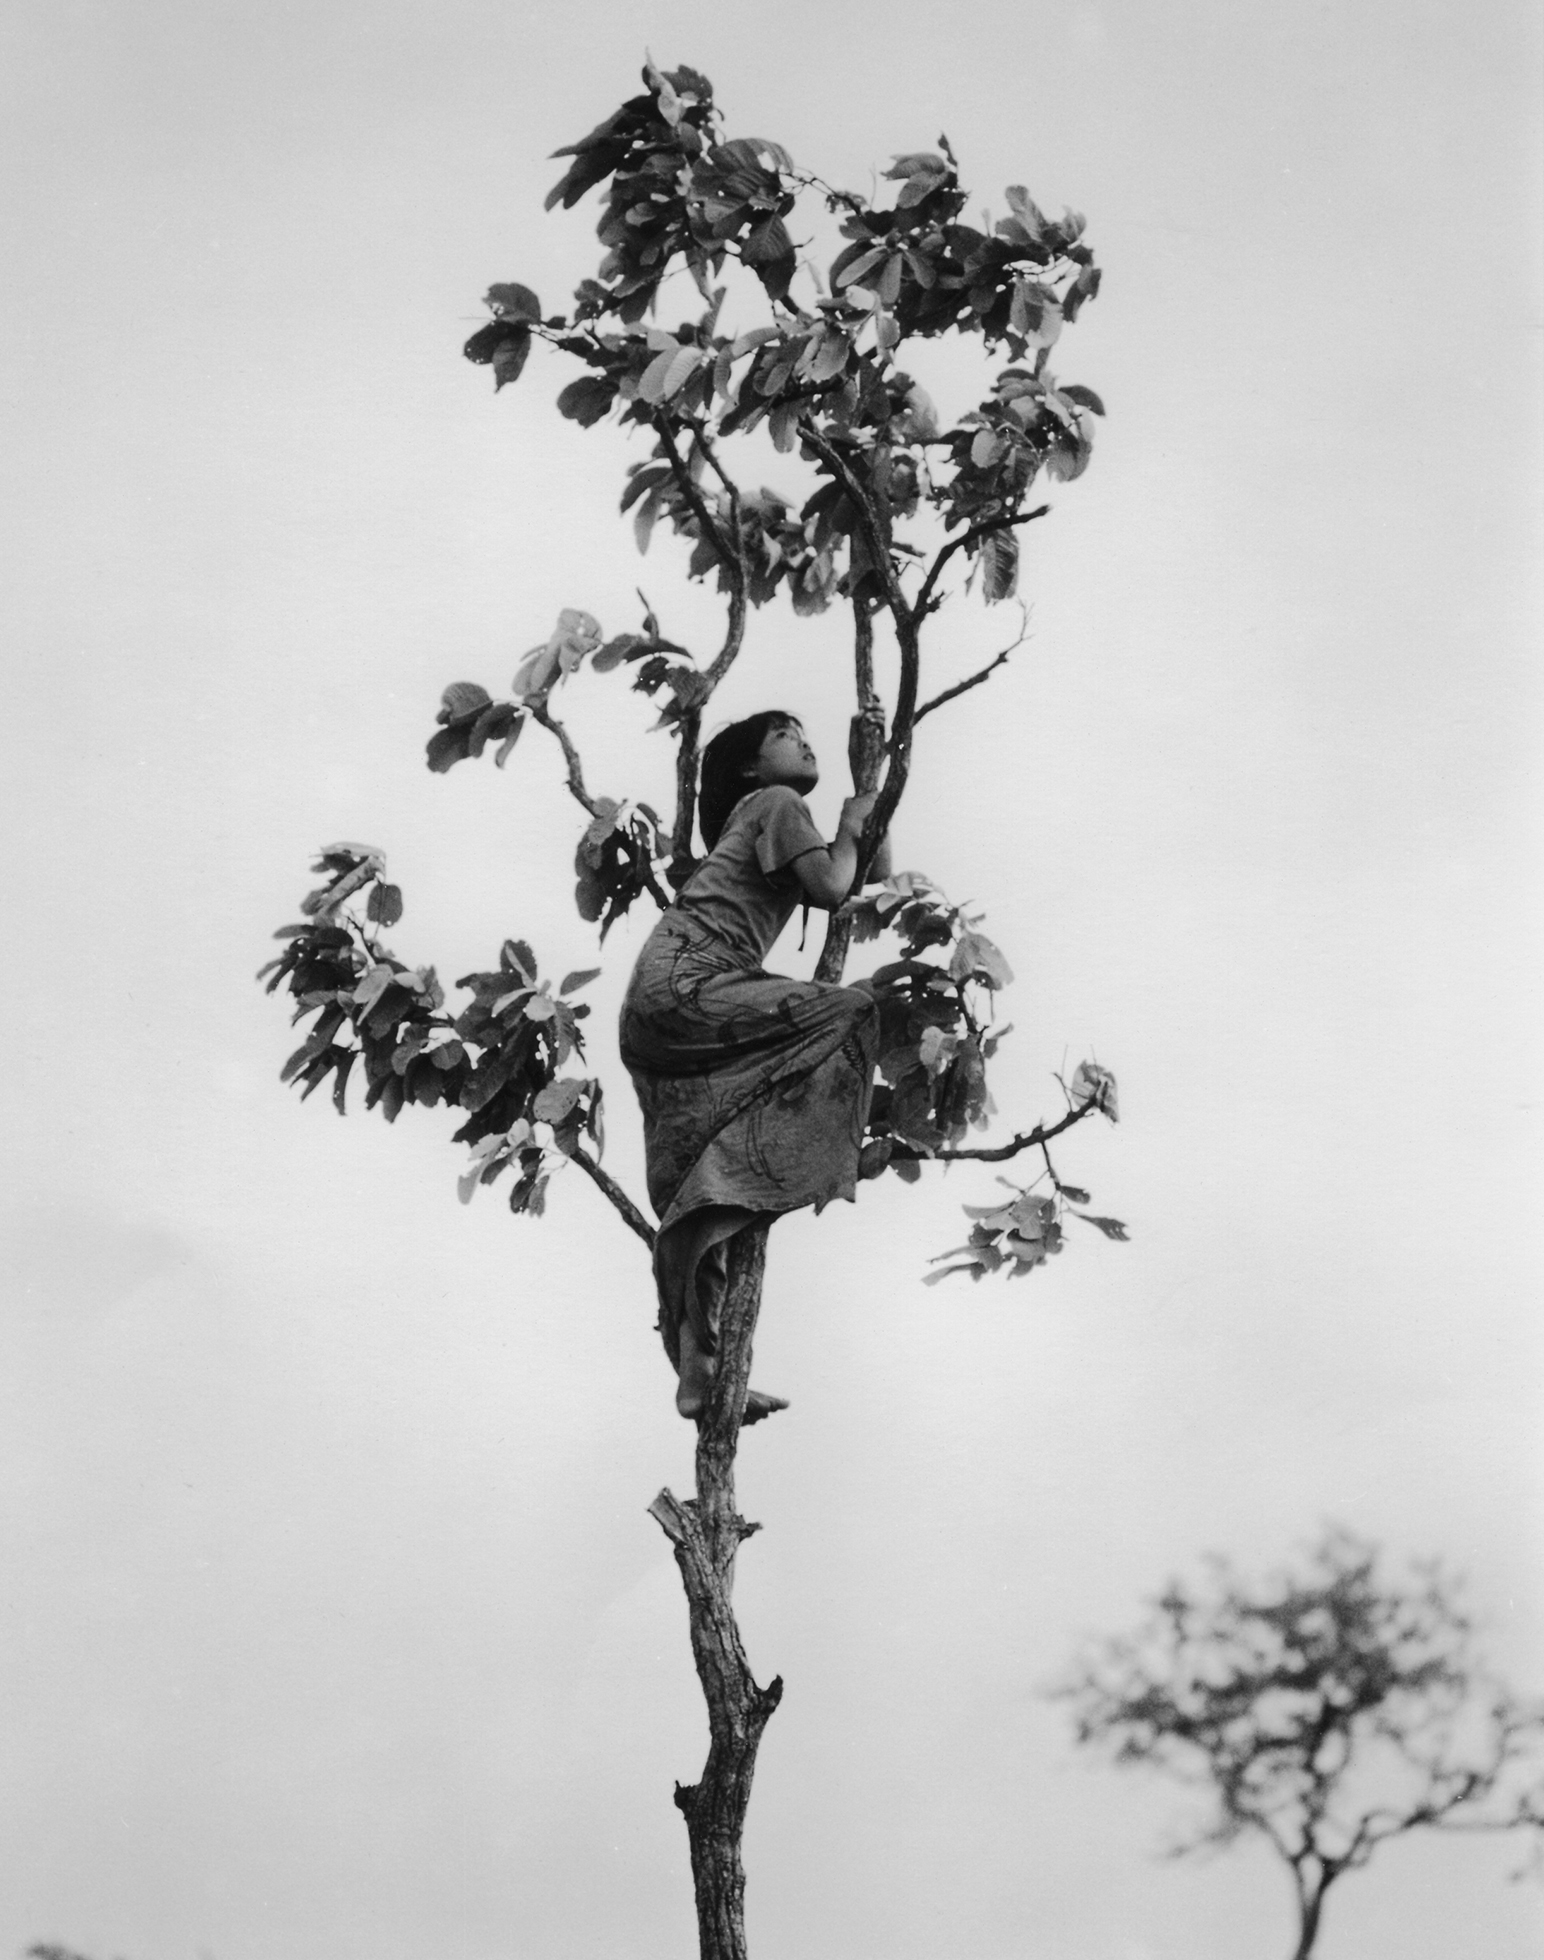 A barefoot girl in a long dress climbs a tree at the Khao-I-Dang refugee camp at the Thai-Cambodian border in 1980. She is near the top where there are still branches and leaves; the trunk has stubs where the rest of the branches have broken off.